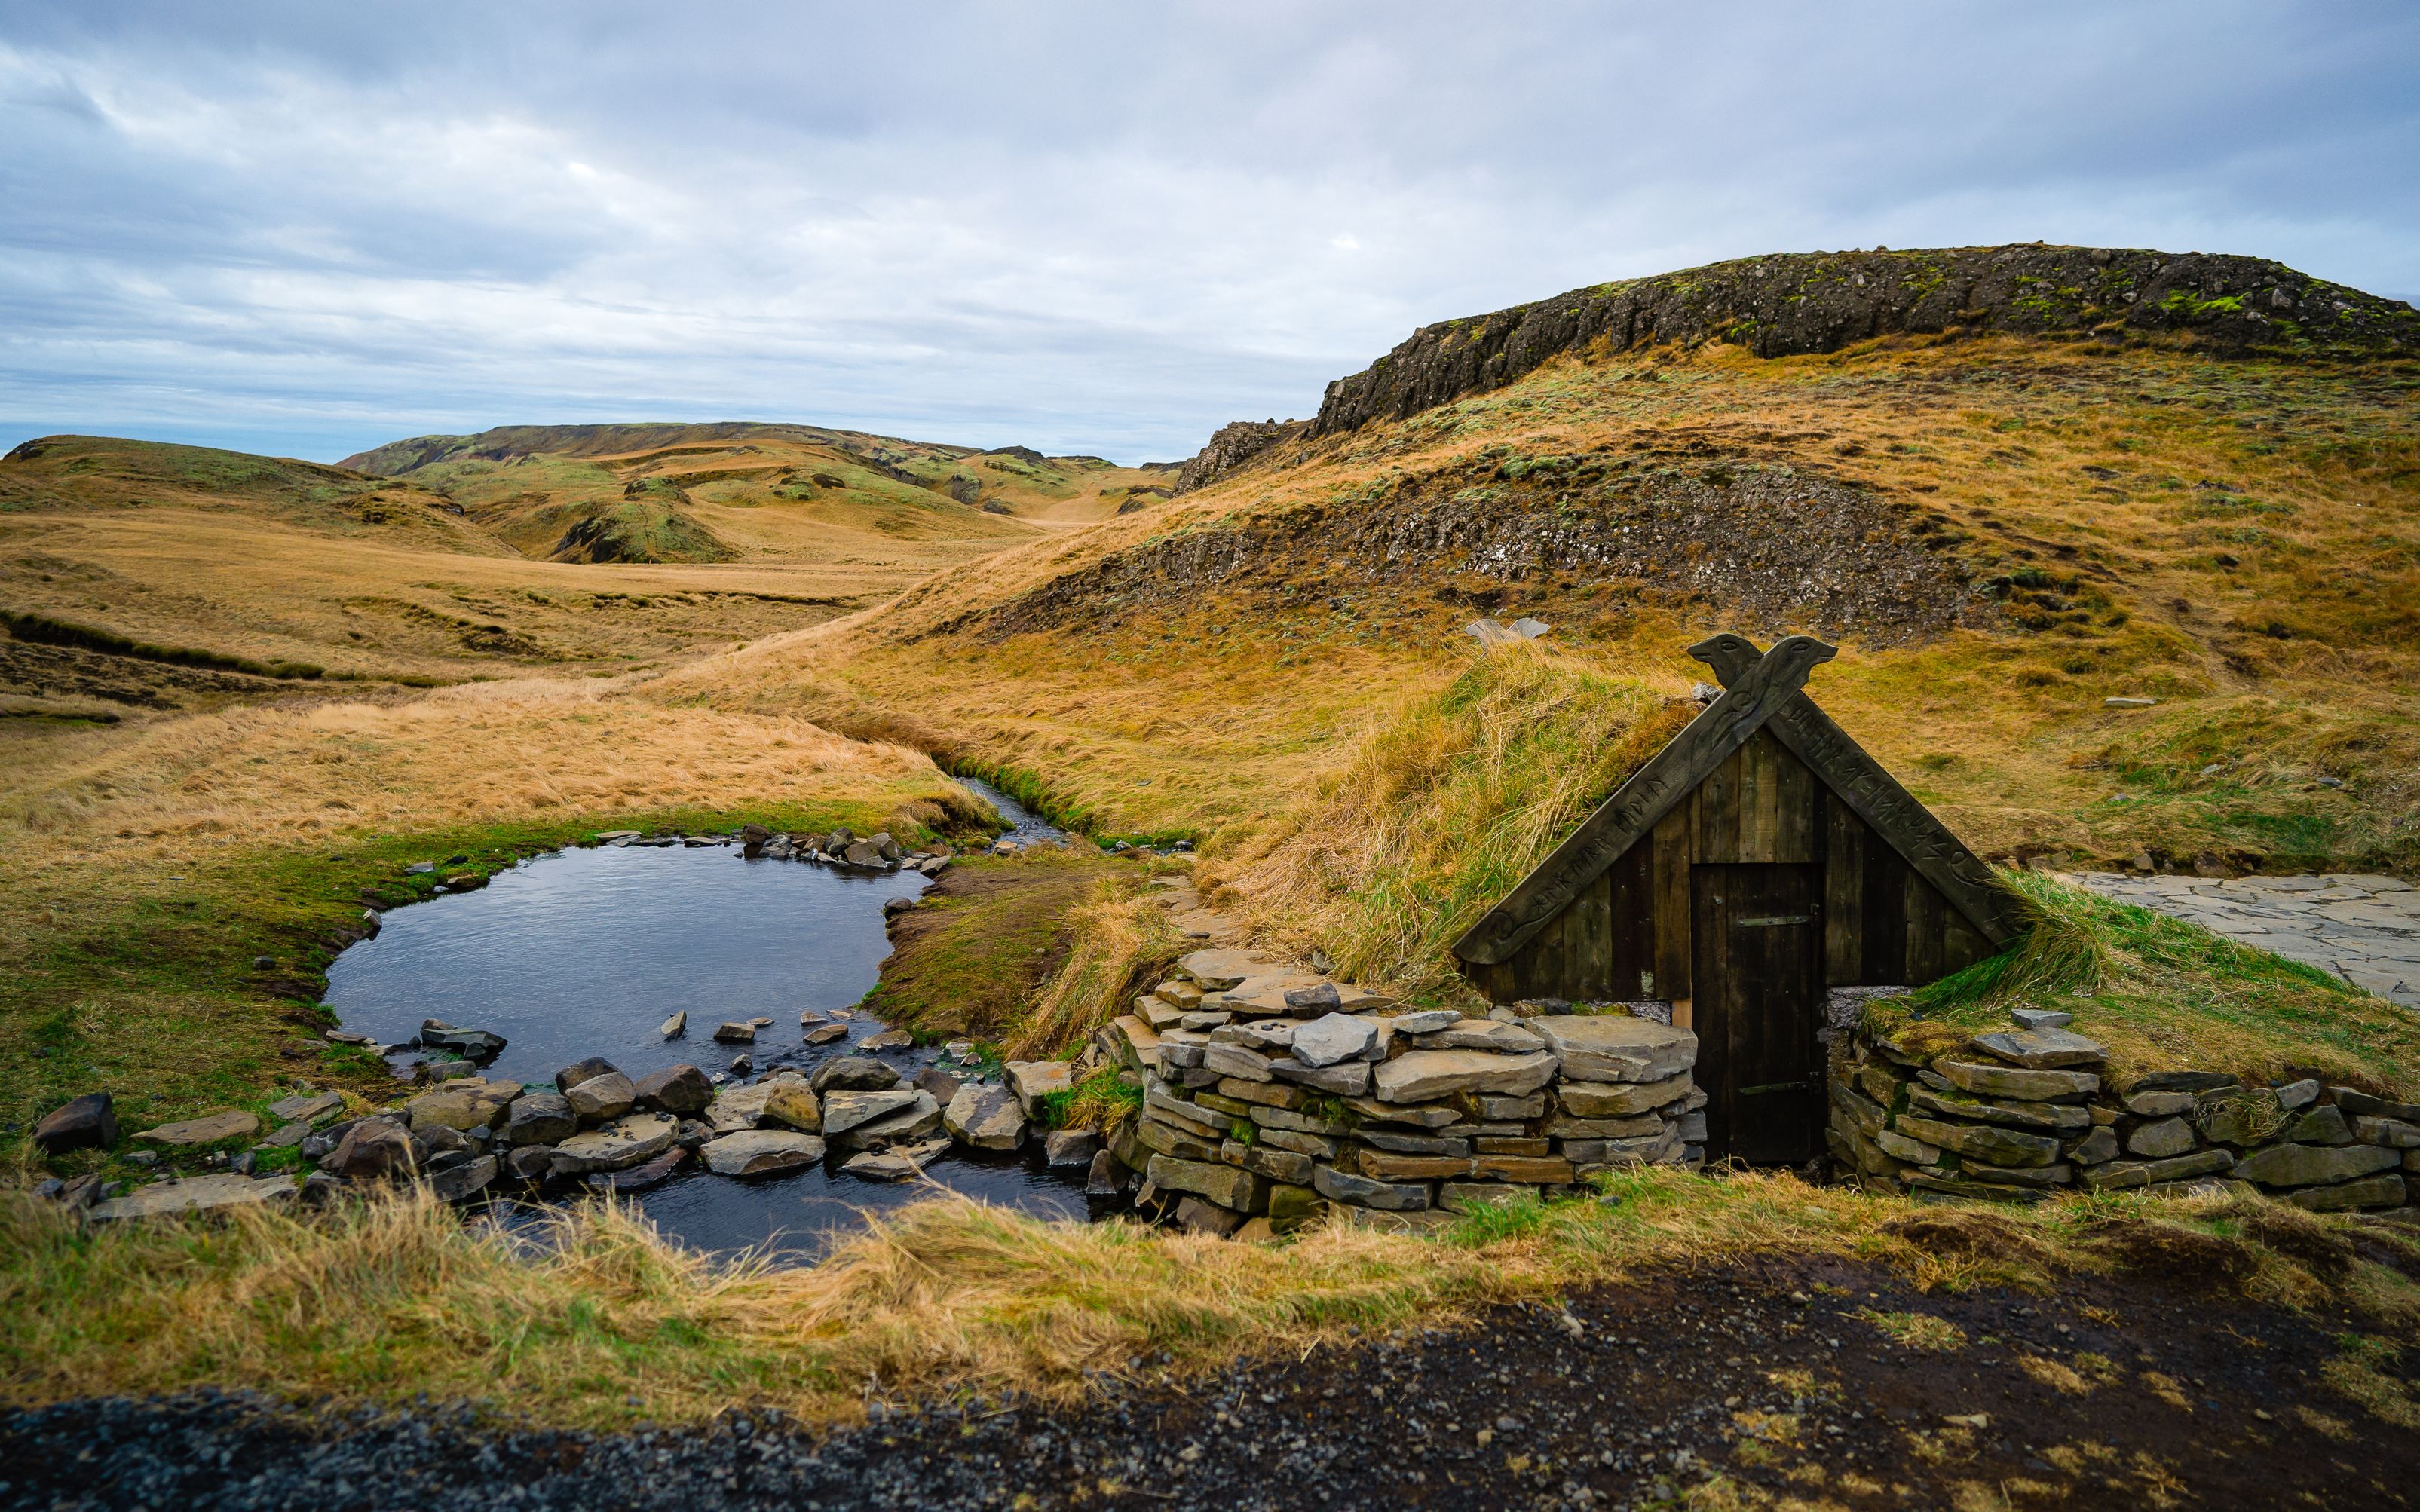 A small hot spring in Iceland with a small turf house next to it. The Hrunalaug Hot Spring.